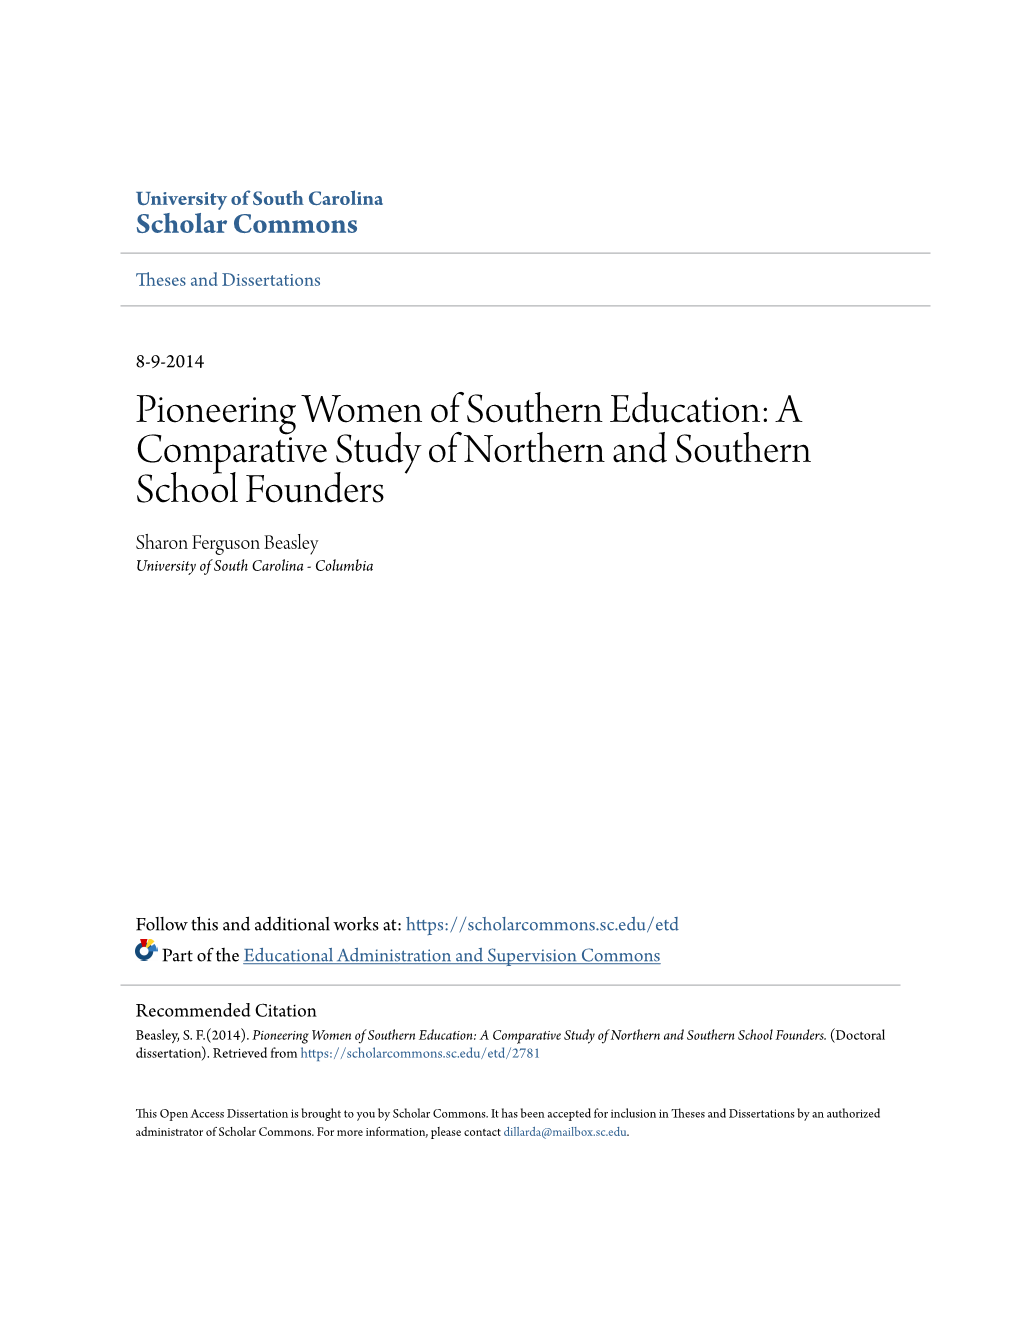 Pioneering Women of Southern Education: a Comparative Study of Northern and Southern School Founders Sharon Ferguson Beasley University of South Carolina - Columbia